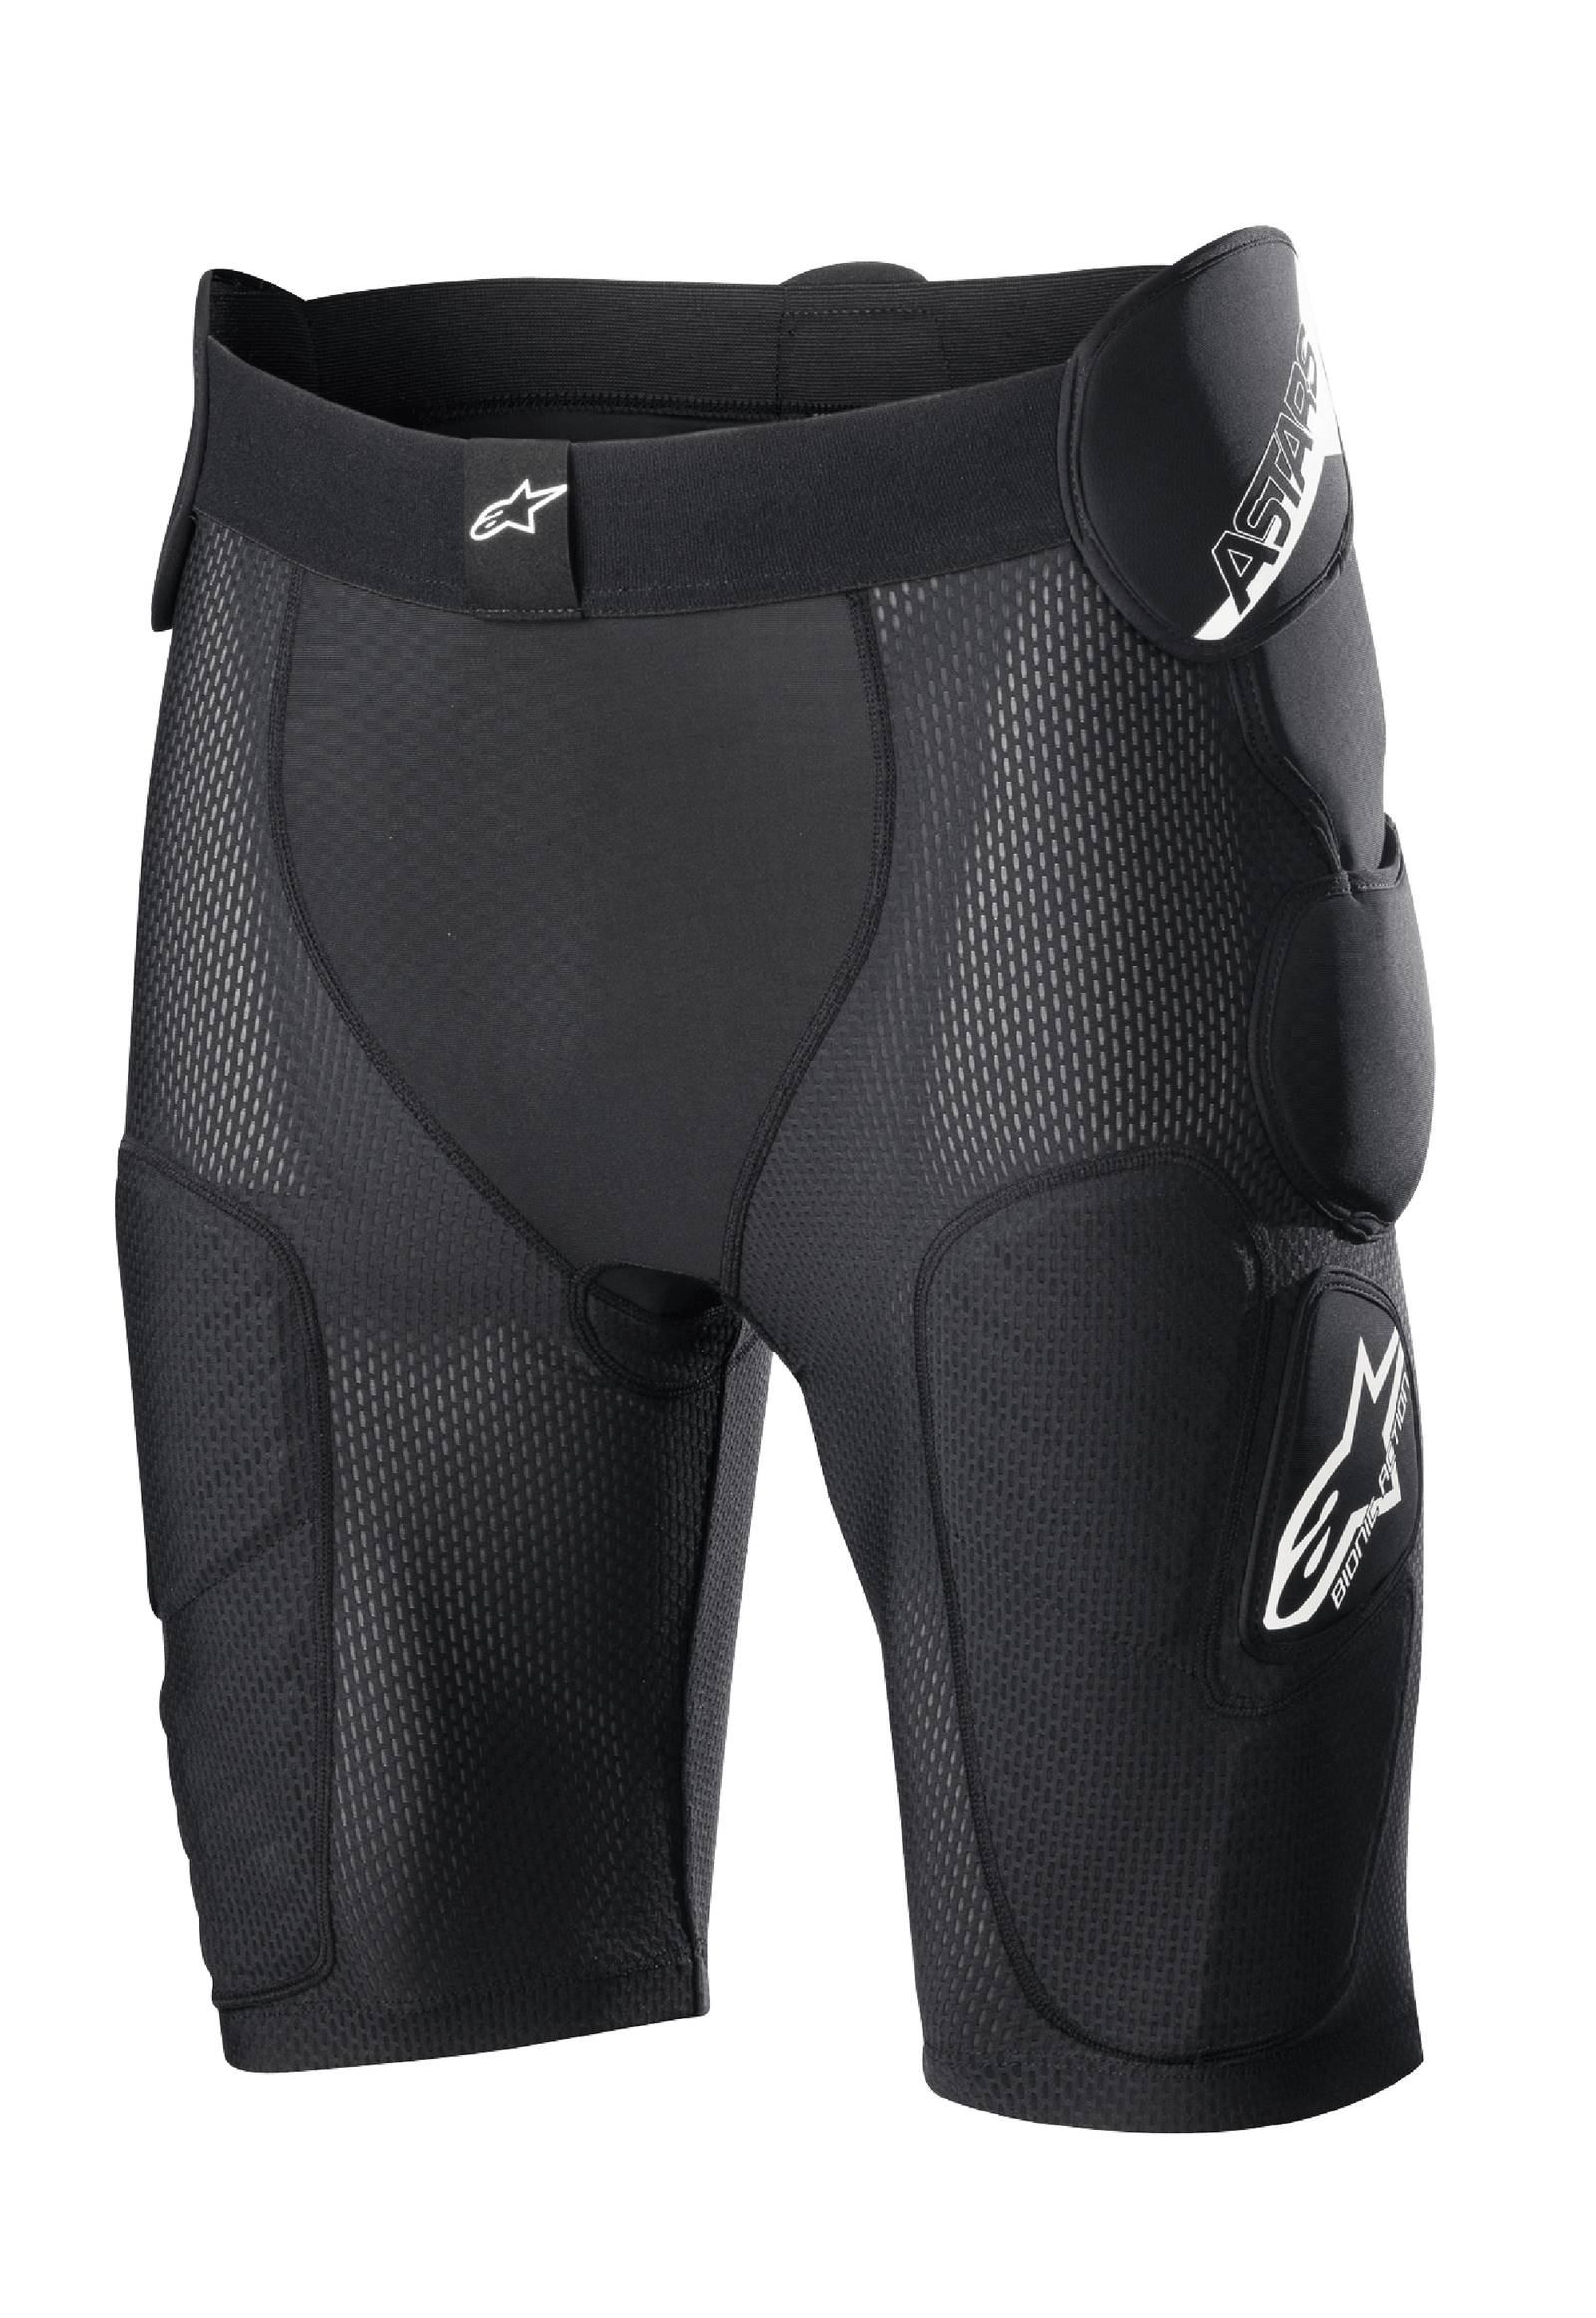 Bionic Action Protection Shorts